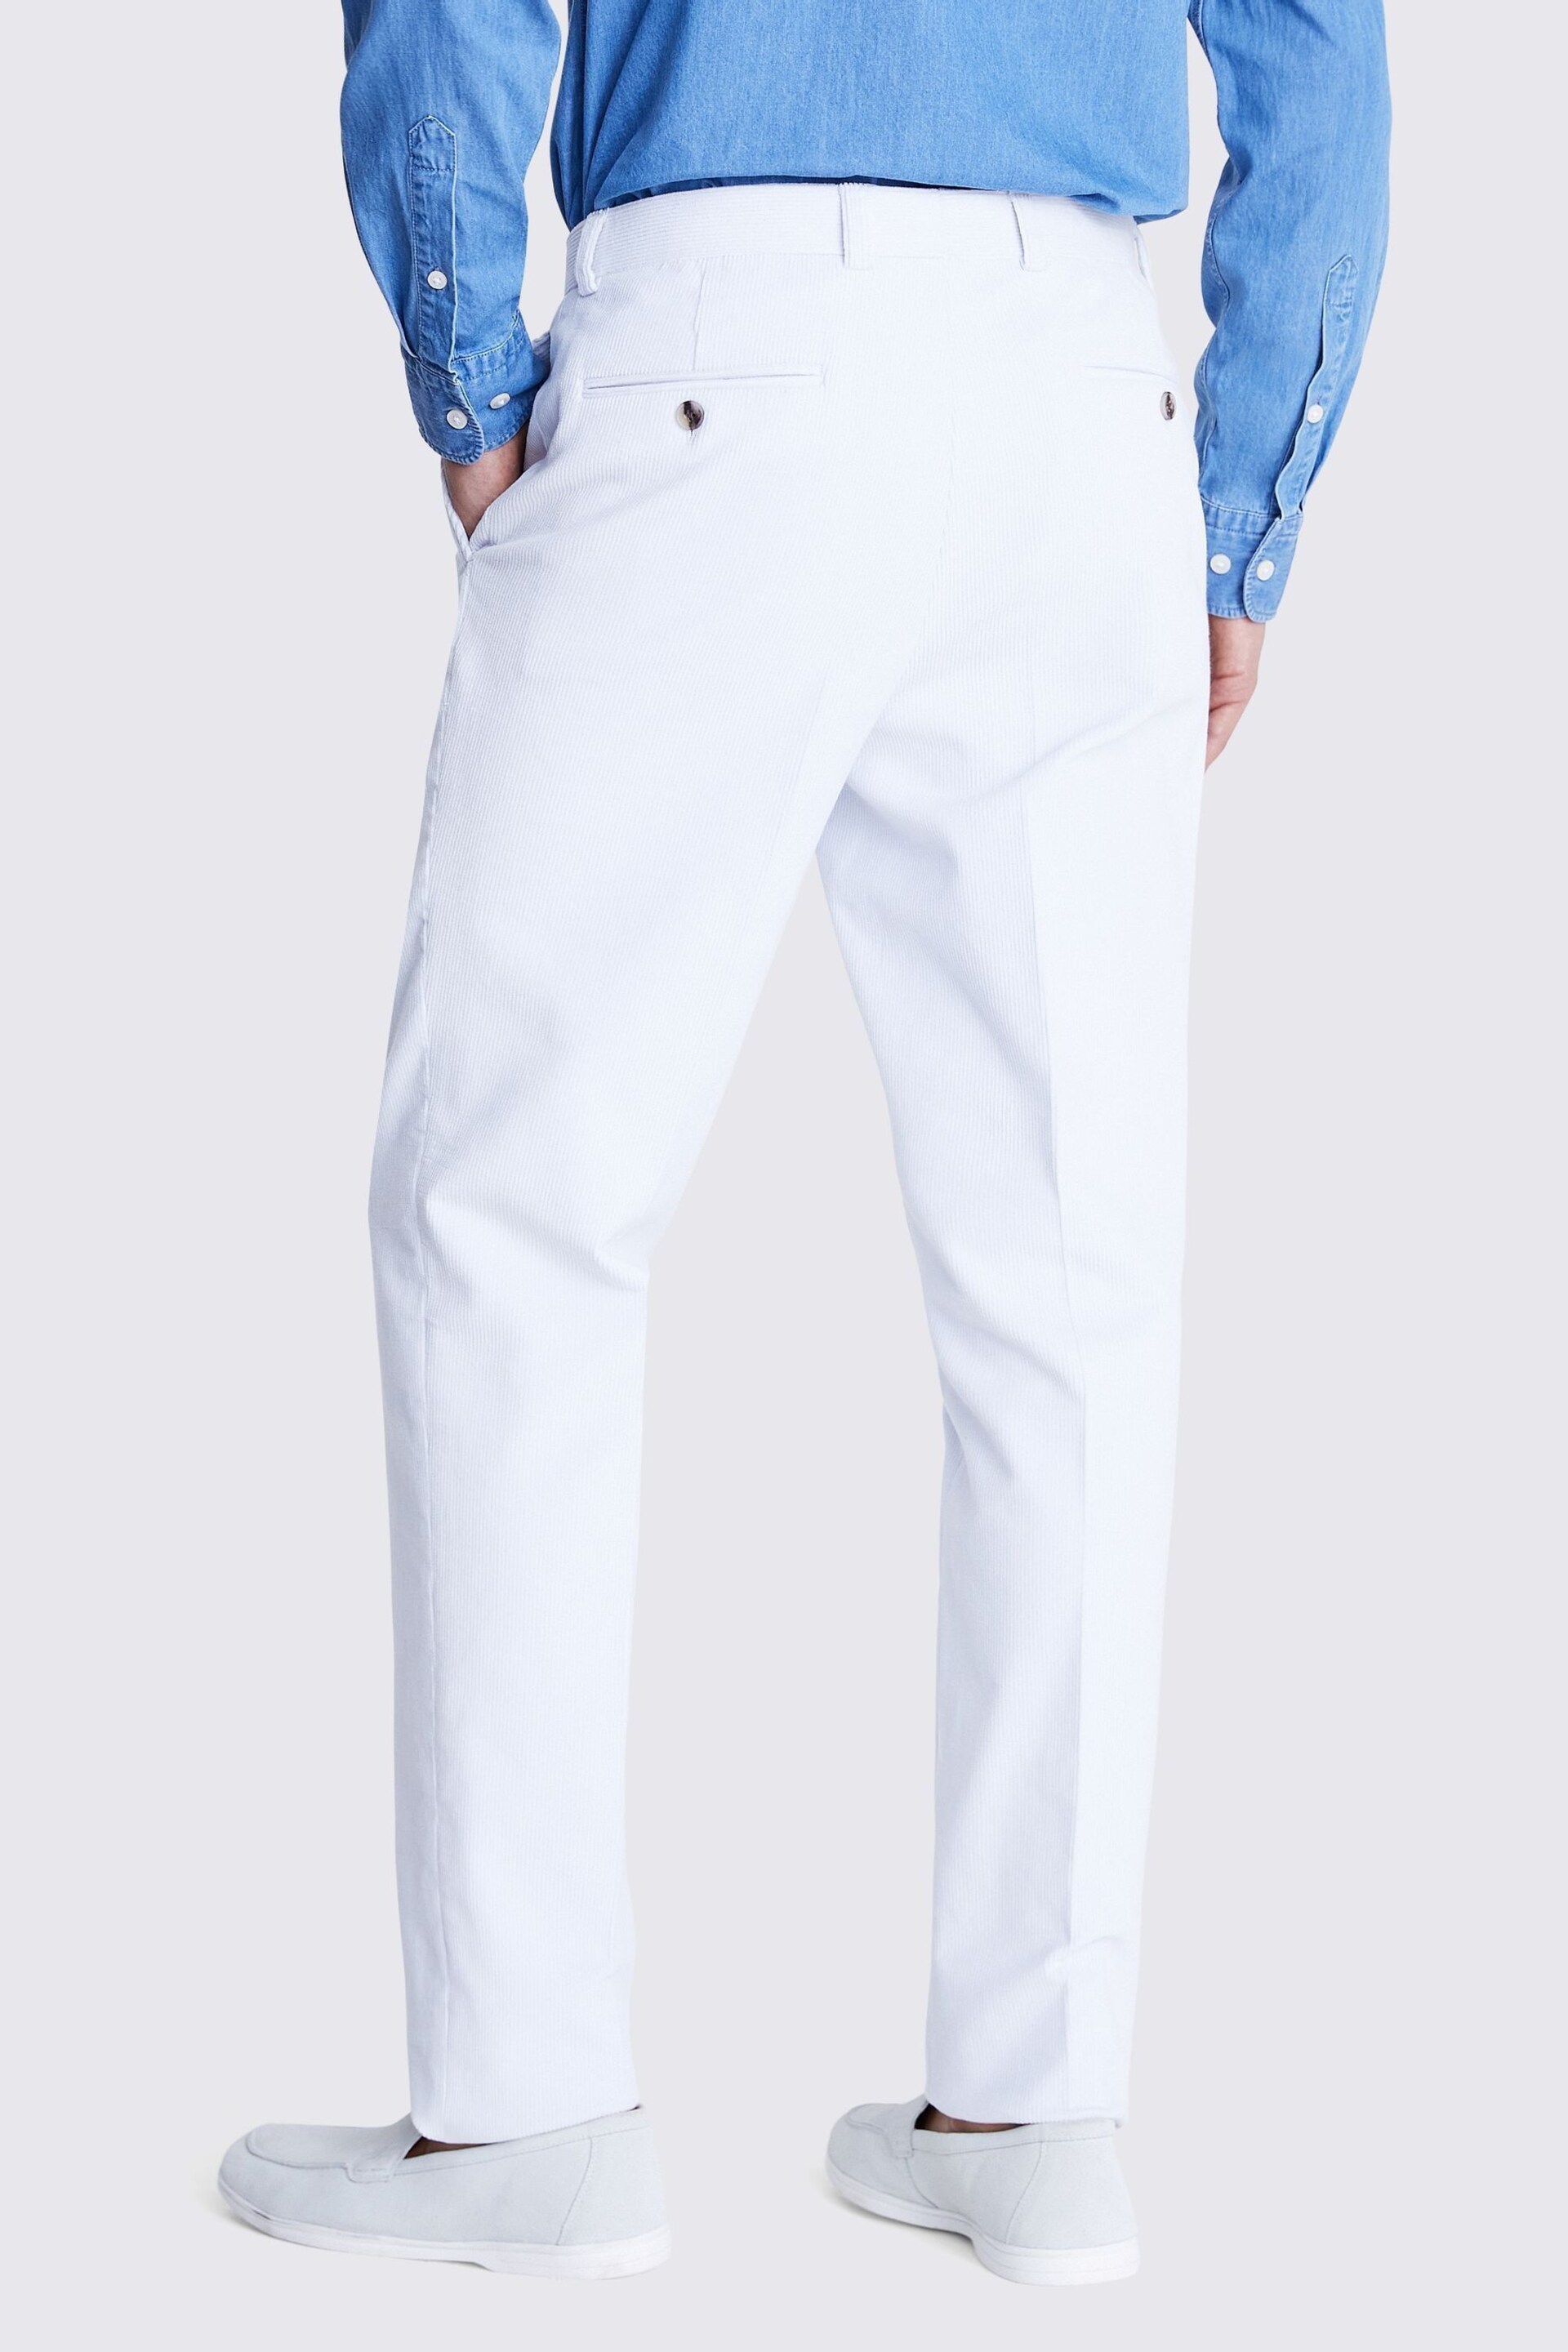 MOSS Tailored Fit Light Blue Corduroy Trousers - Image 2 of 3